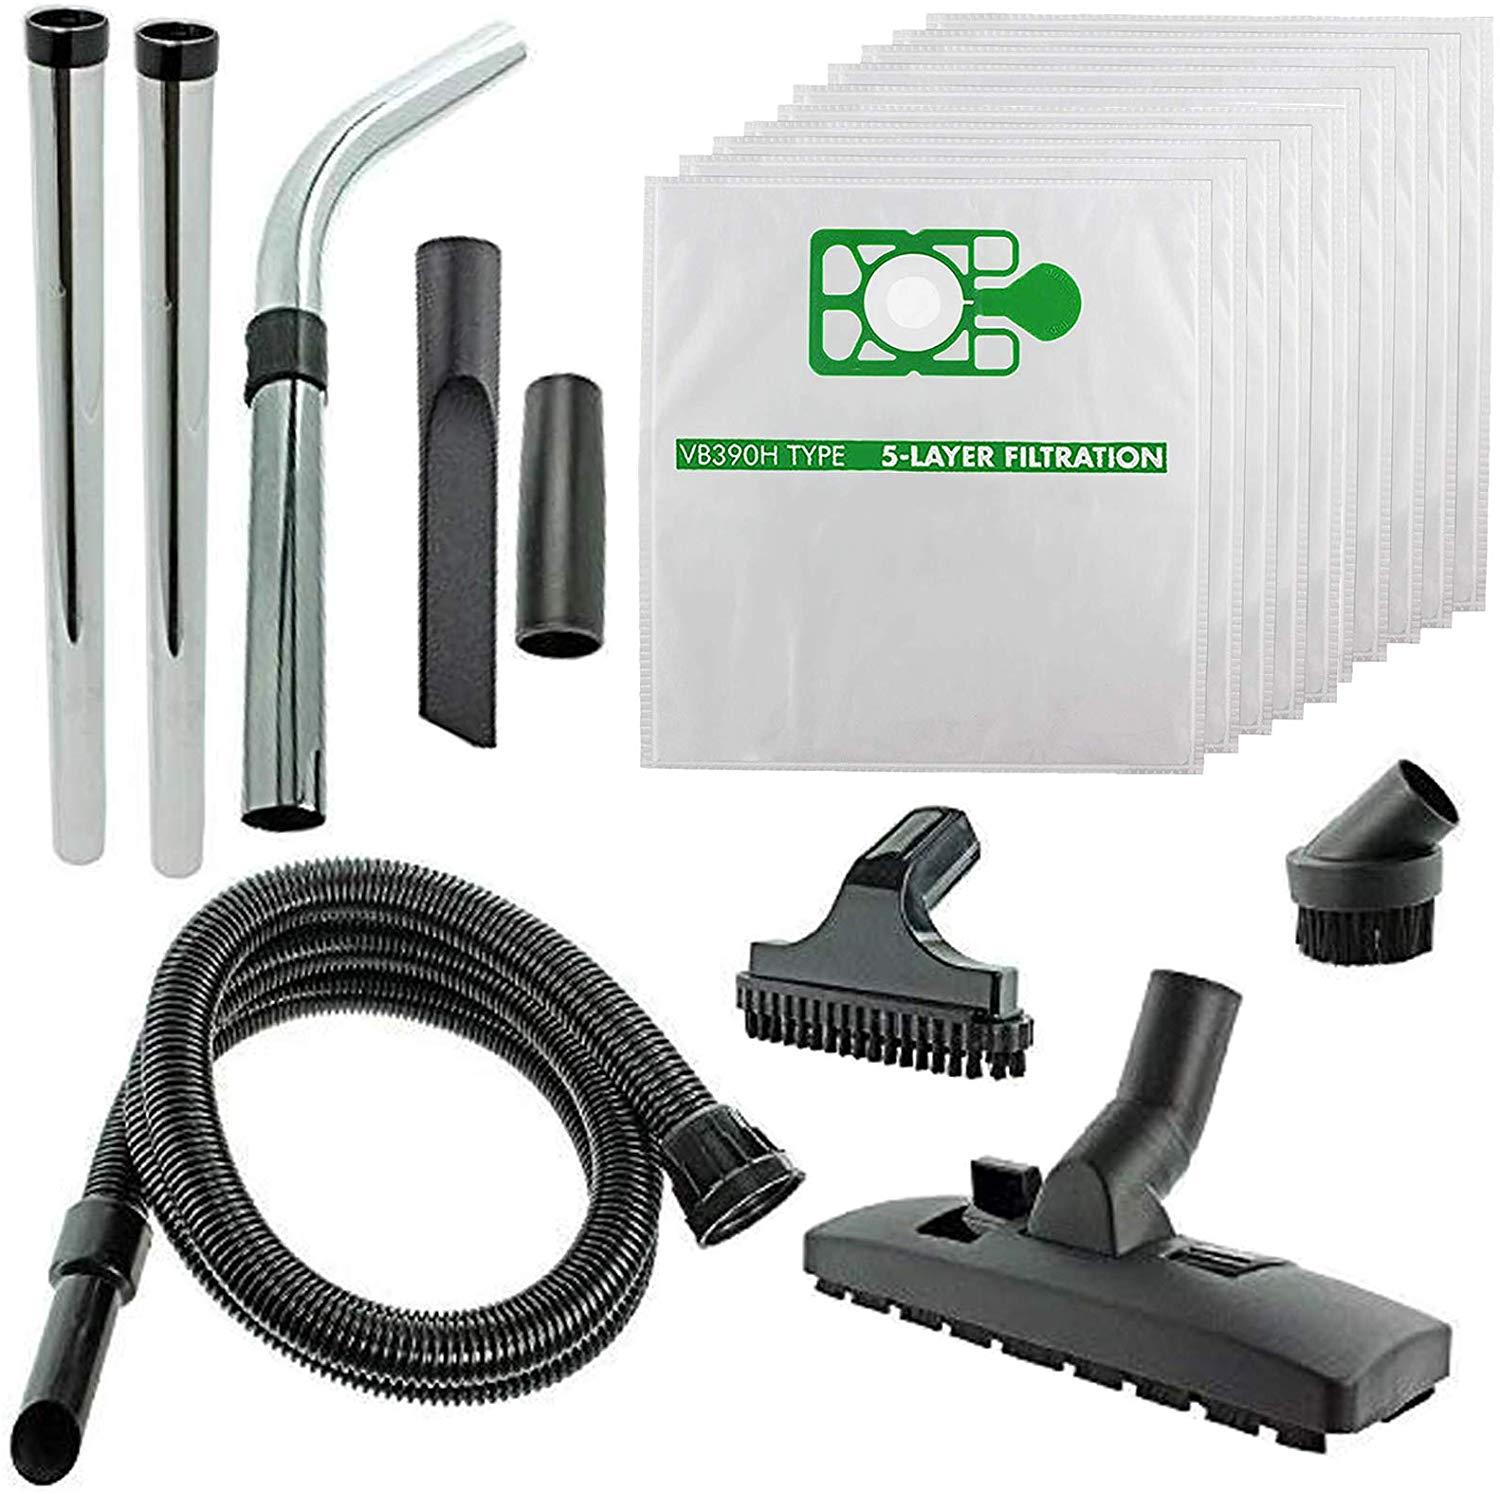 SPARES2GO Complete 2.5m Spare Parts Tool Kit + 10 Dust Bags for Numatic Henry HVR200 HVR200T HVC200 Vacuum Cleaner